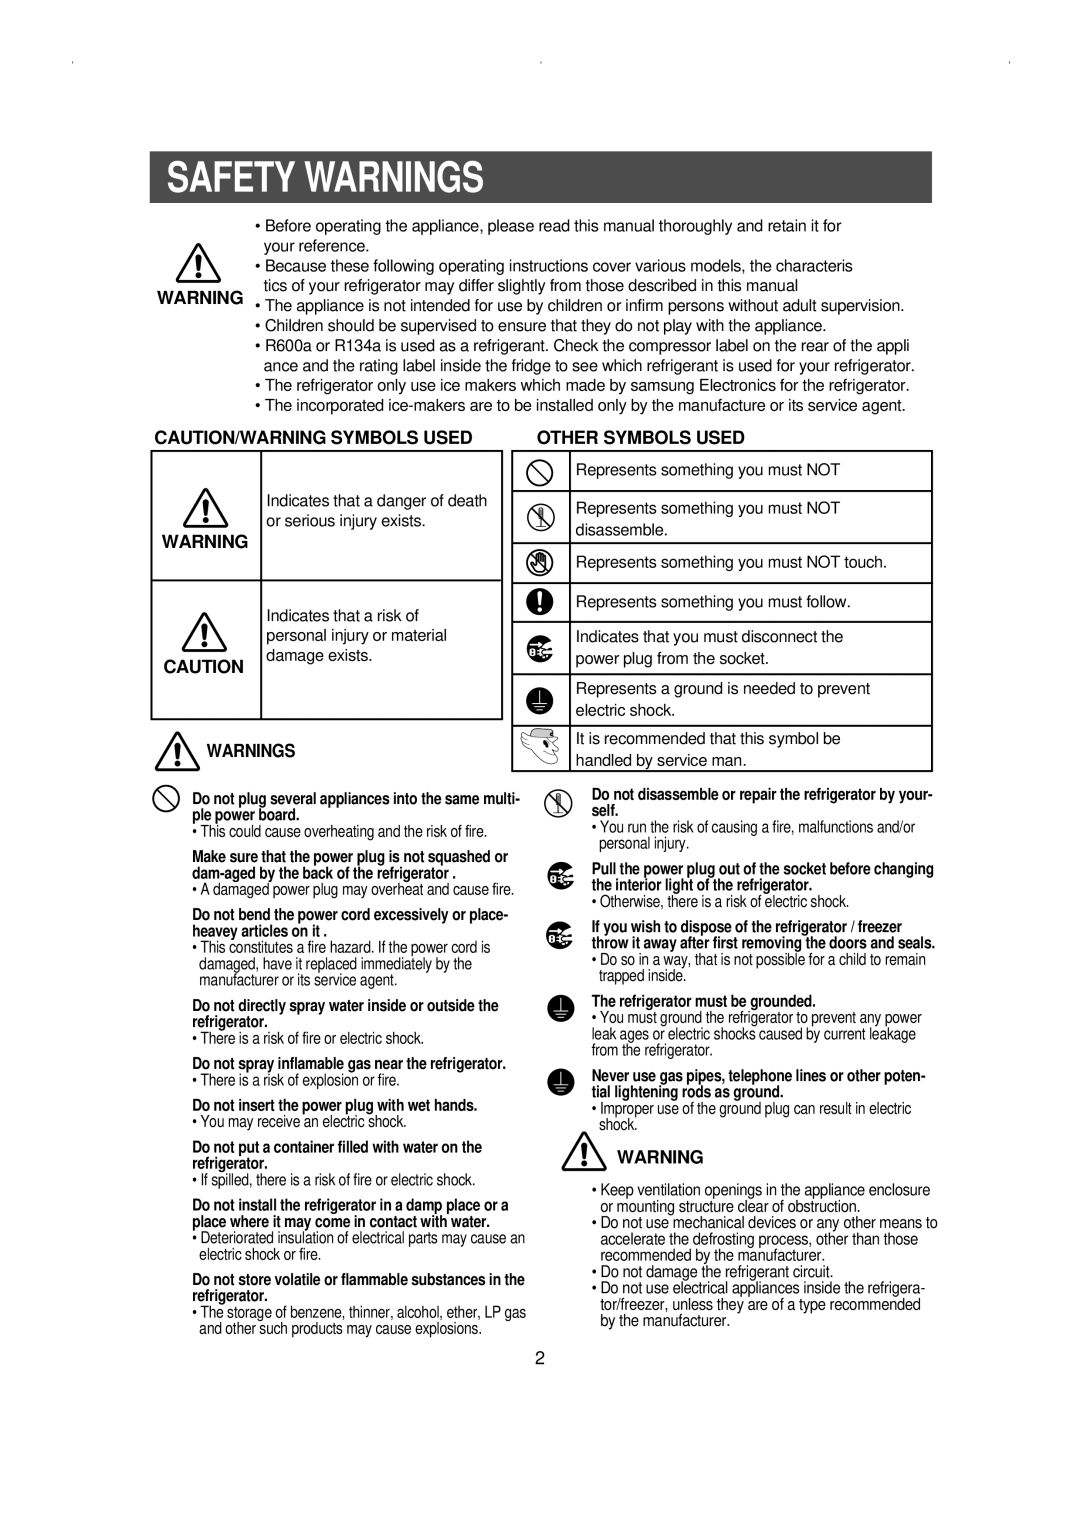 Samsung RS23KCSW owner manual Safety Warnings, Caution/Warning Symbols Used, Other Symbols Used 